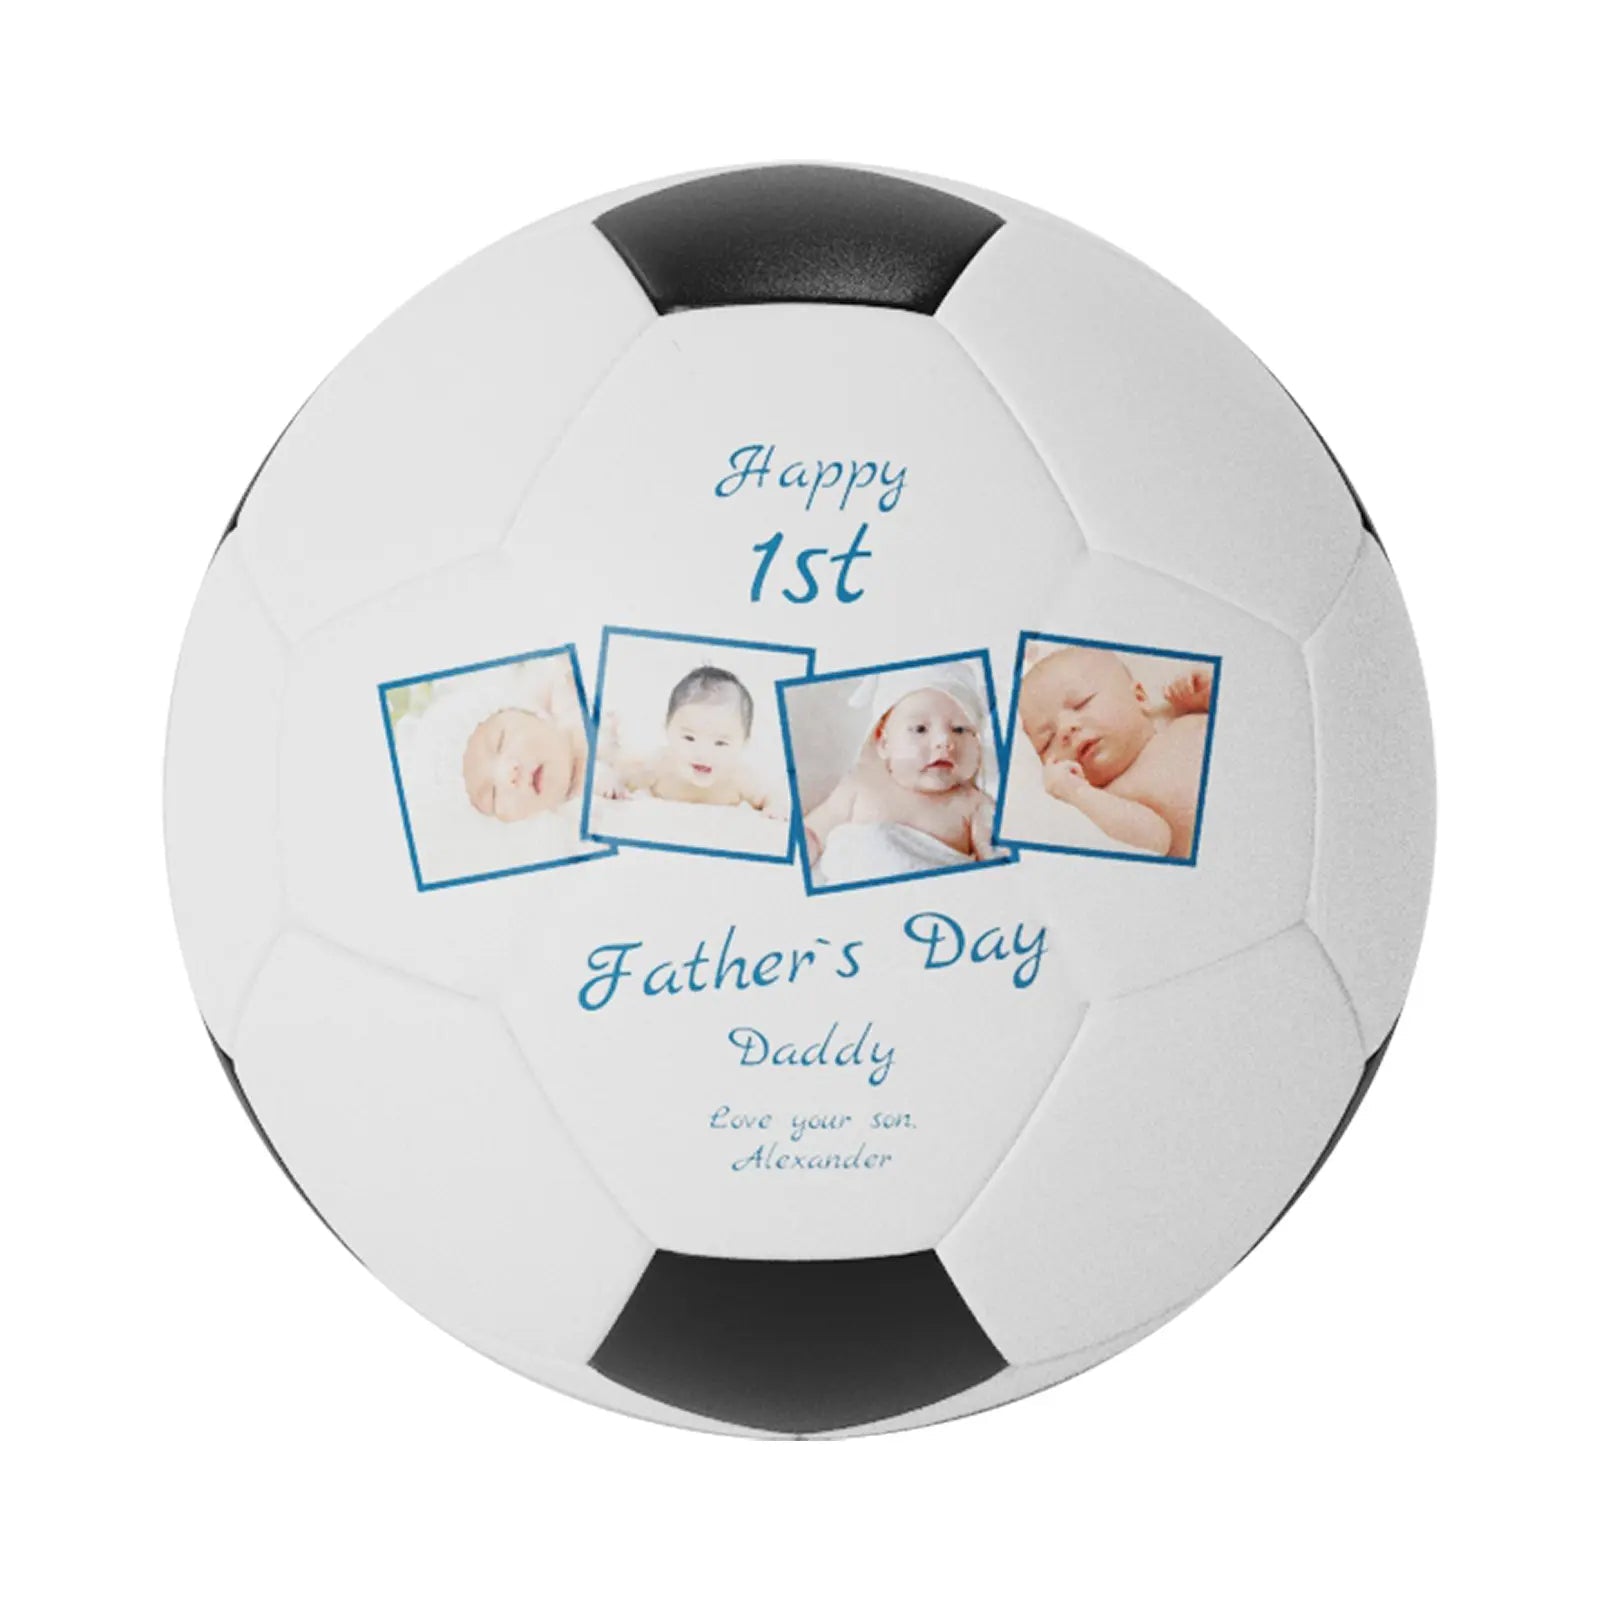 Best Dad Father's Day Photo Gifts Soccer Ball - Family Watchs